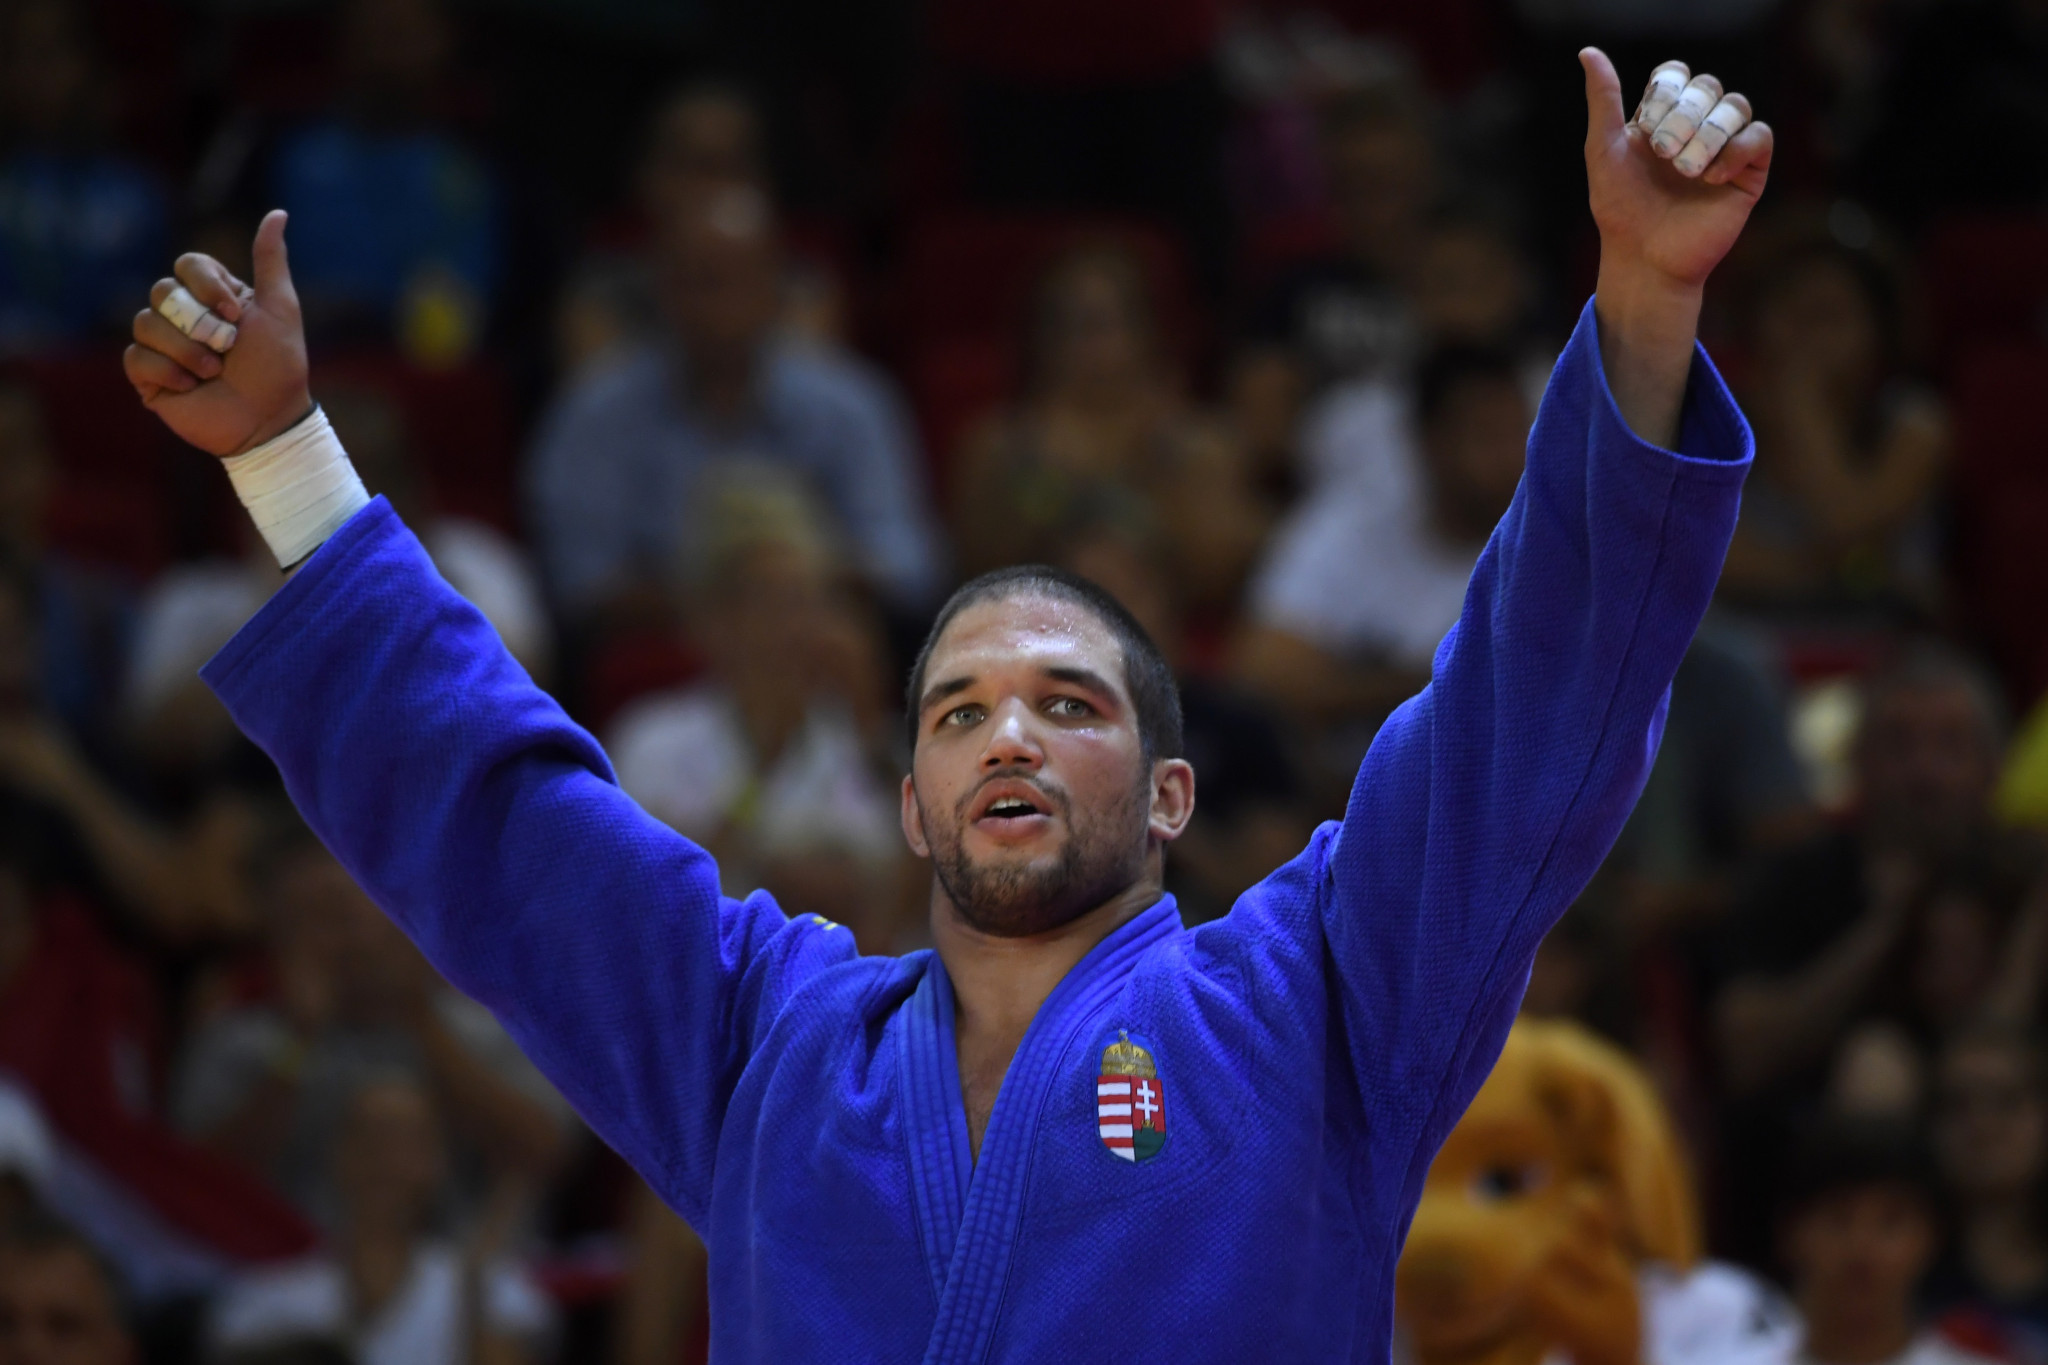 Hungary's Tóth eyeing home glory at IJF Grand Prix in Budapest